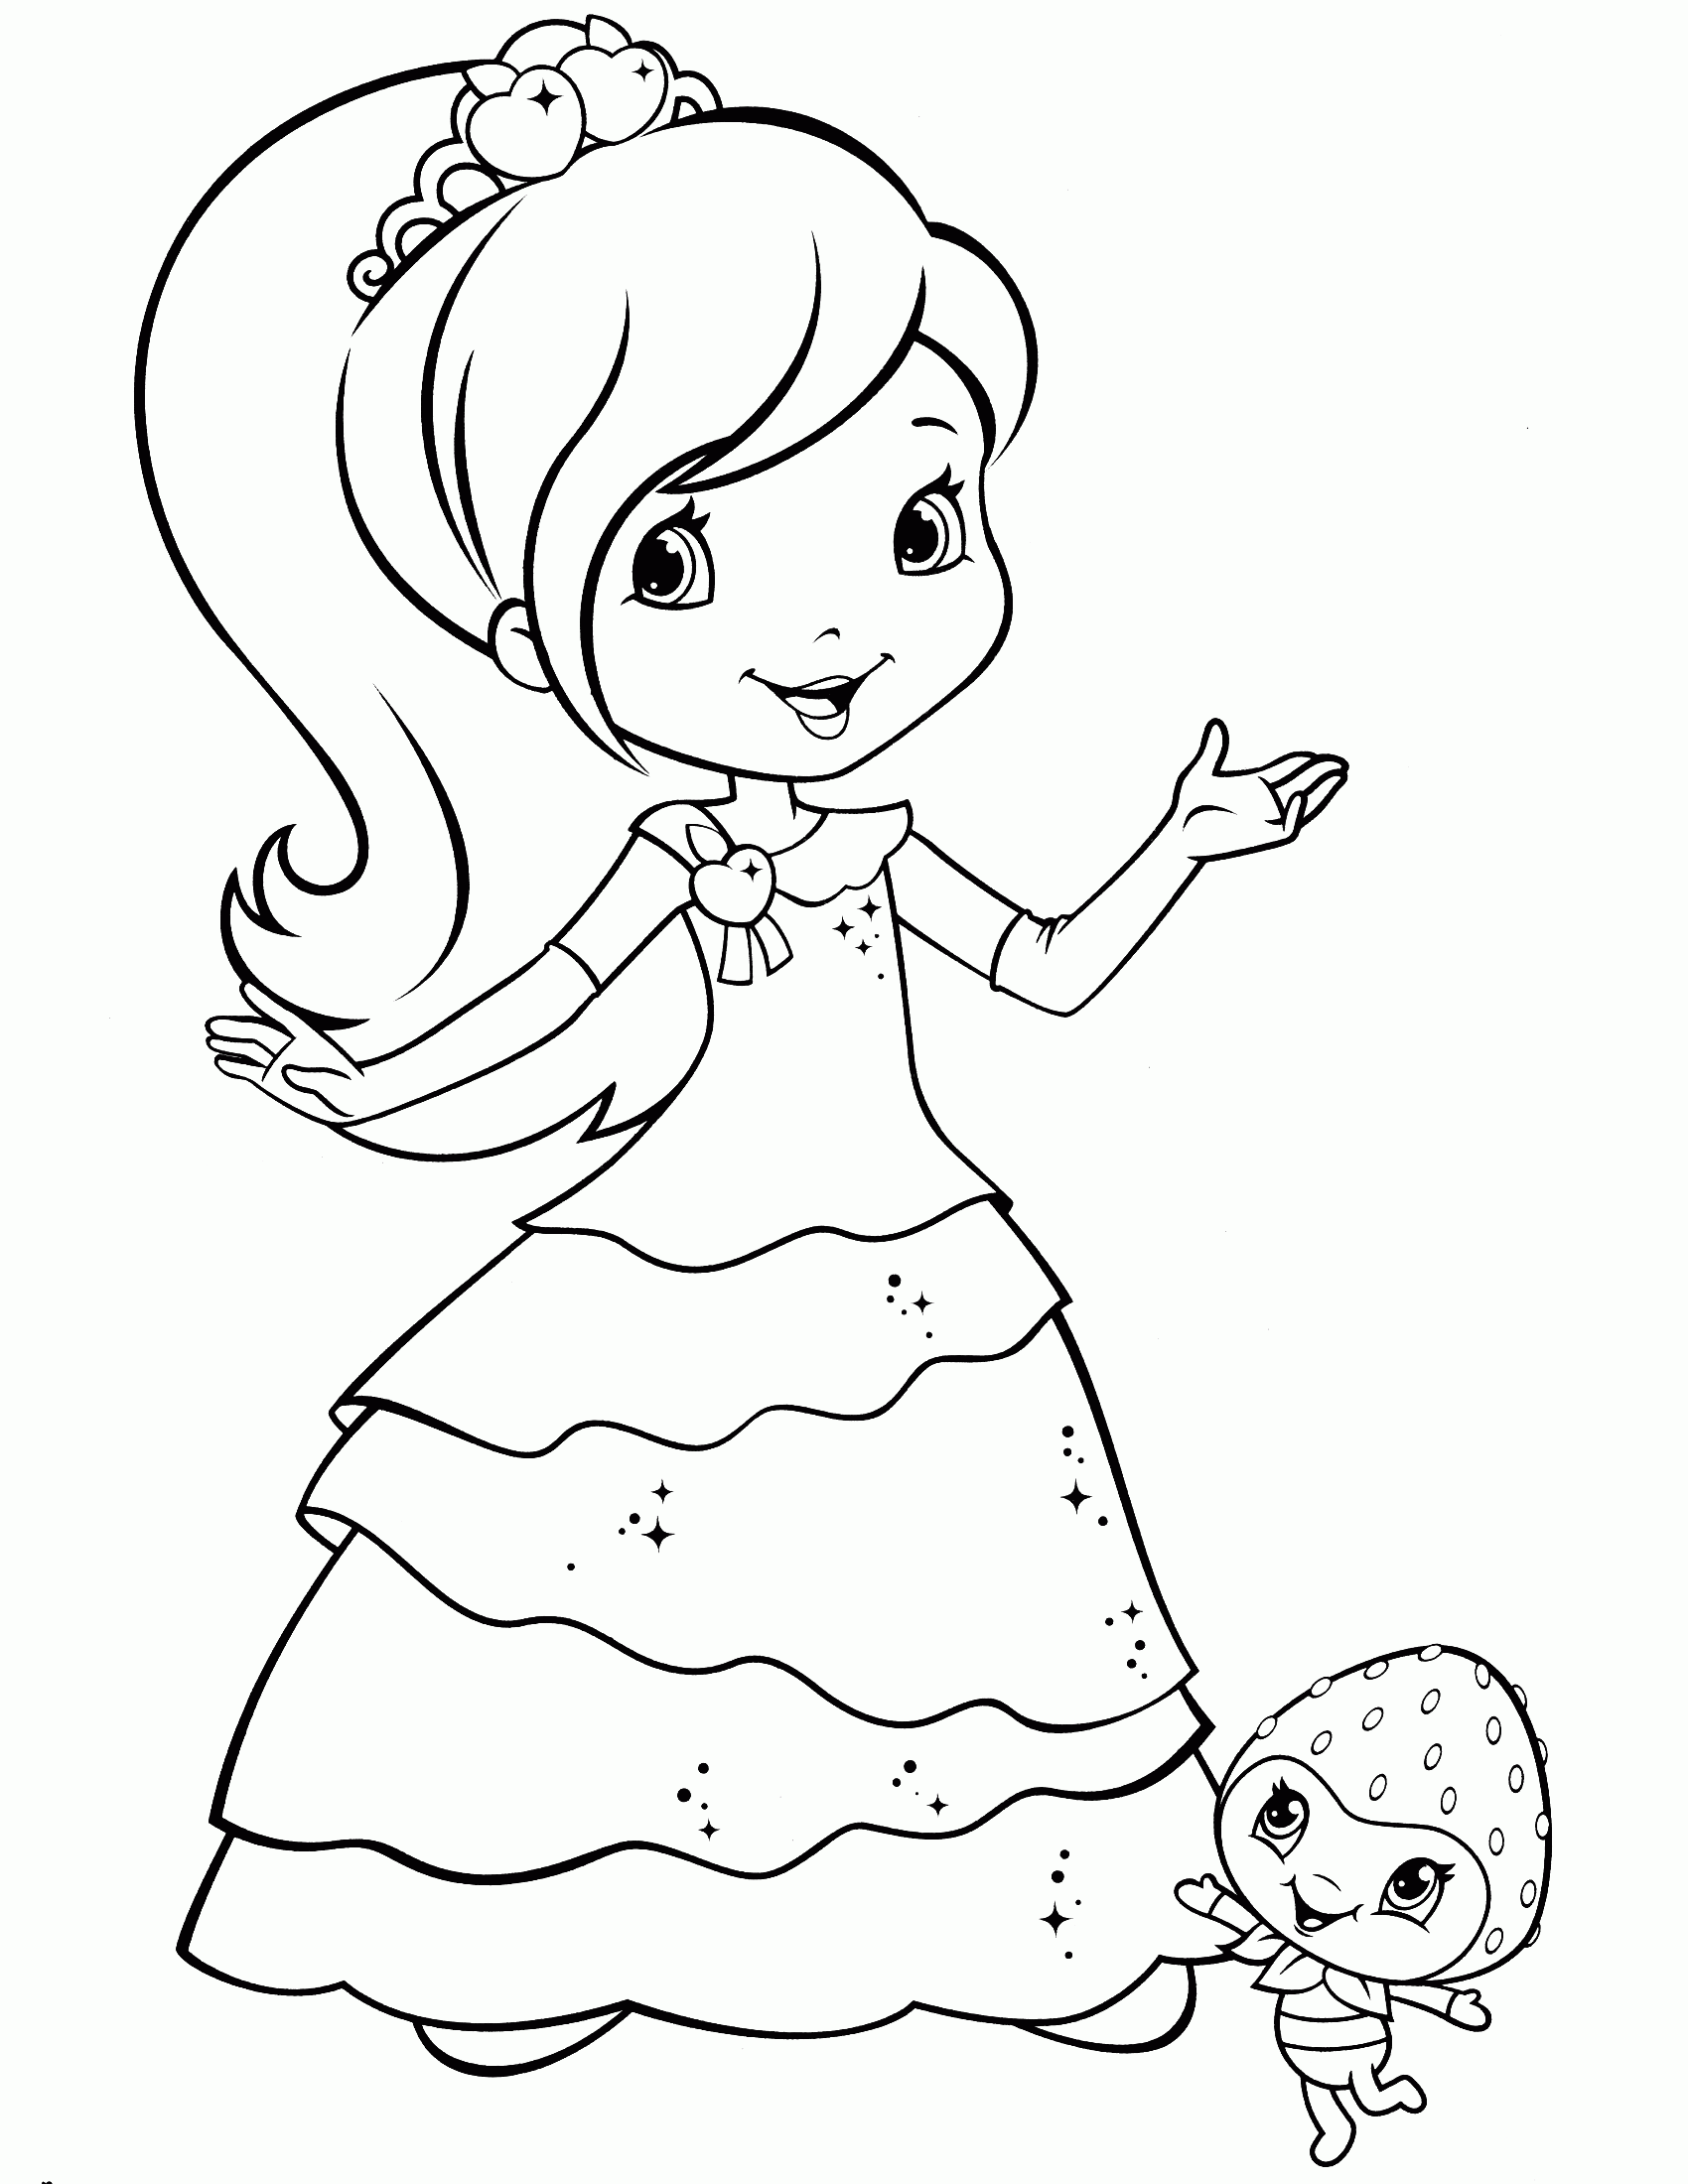 Strawberry Shortcake Coloring Pages Pdf - Coloring Pages